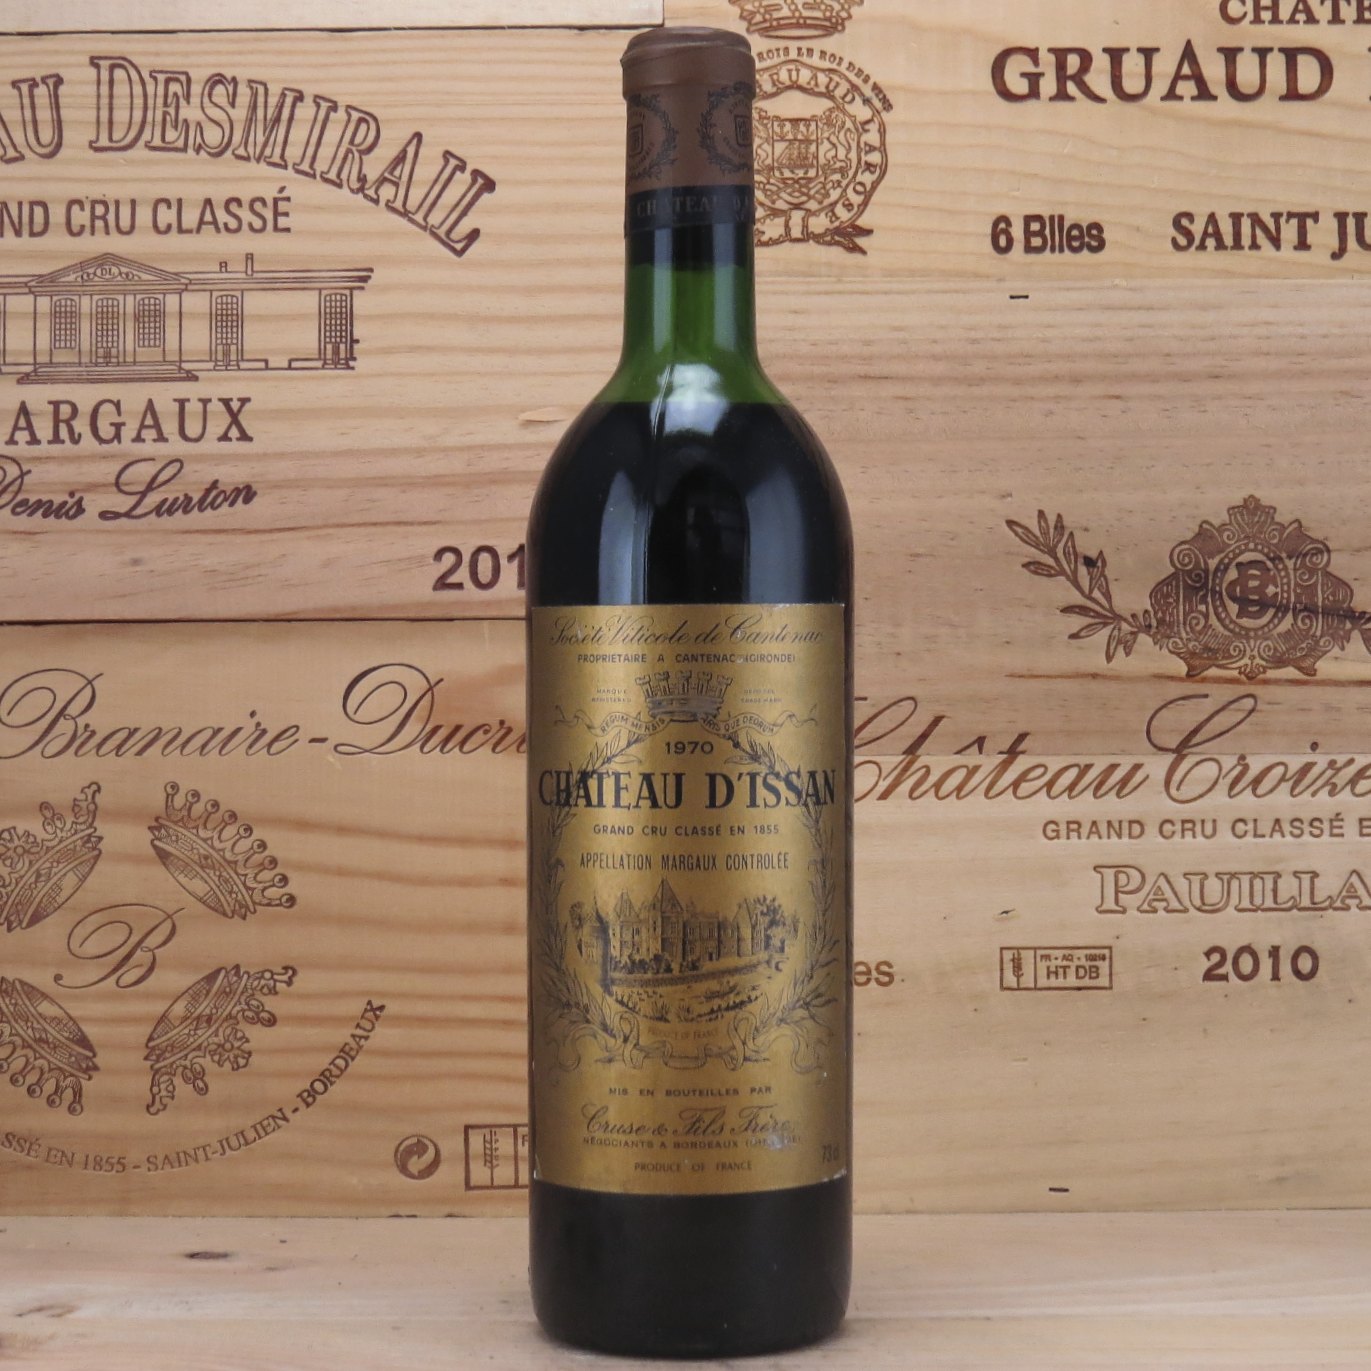 1970 Chateau d'Issan